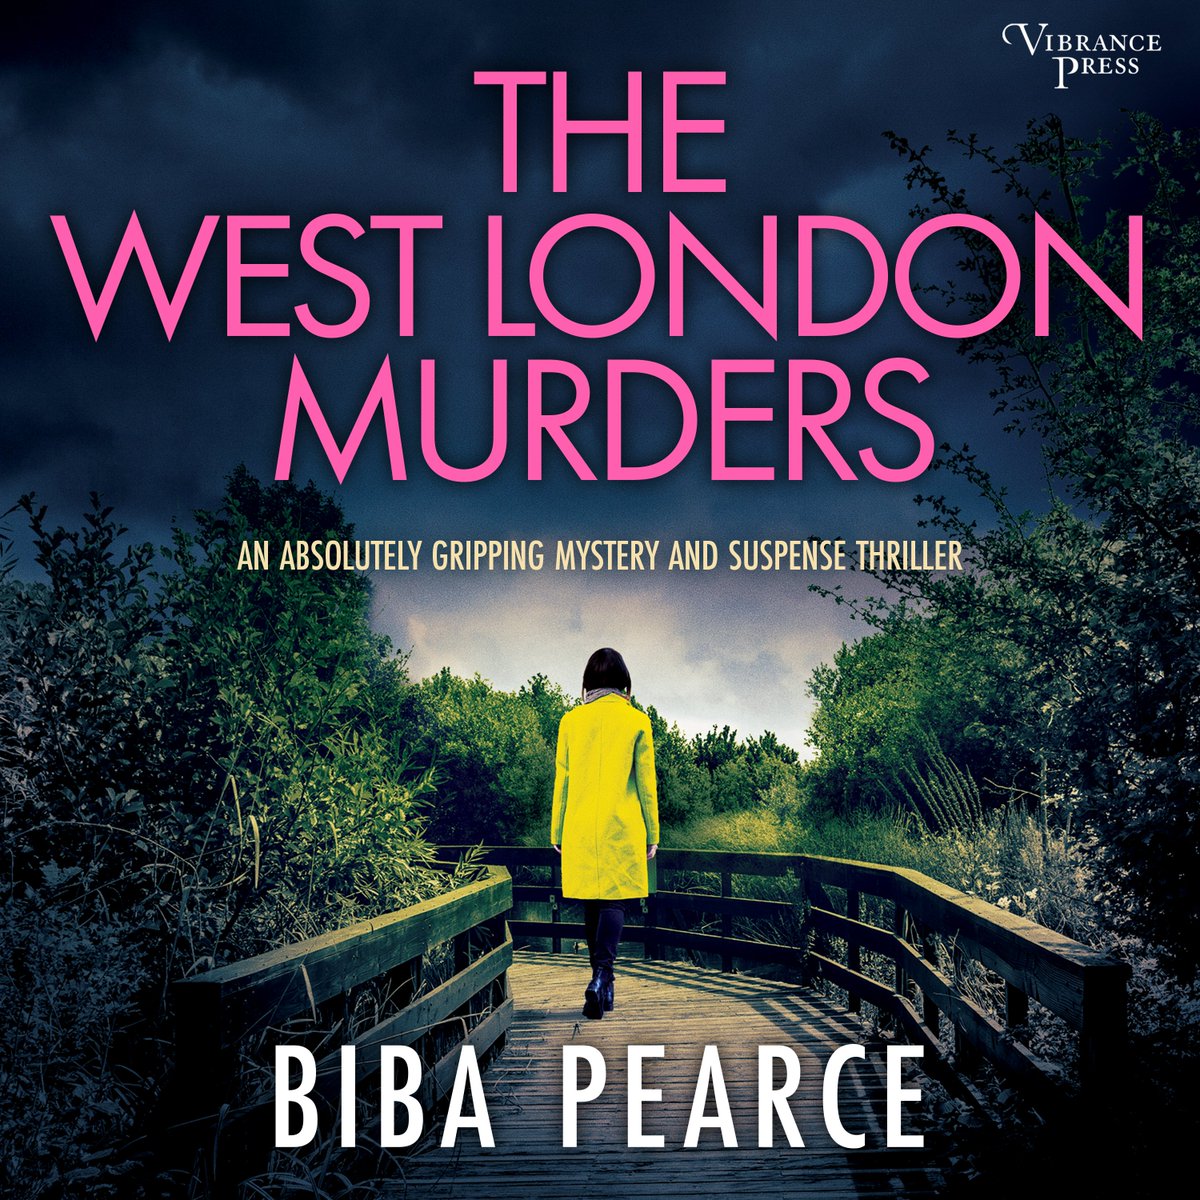 Are you ready for an unstoppable crime mystery that you won't be able to put down?

A spate of brutal stabbings. An ambitious young detective. A killer hell-bent on revenge.

THE WEST LONDON MURDERS, by @BibaPearce narrated by Nathaniel Priestley. In audio from Vibrance Press.